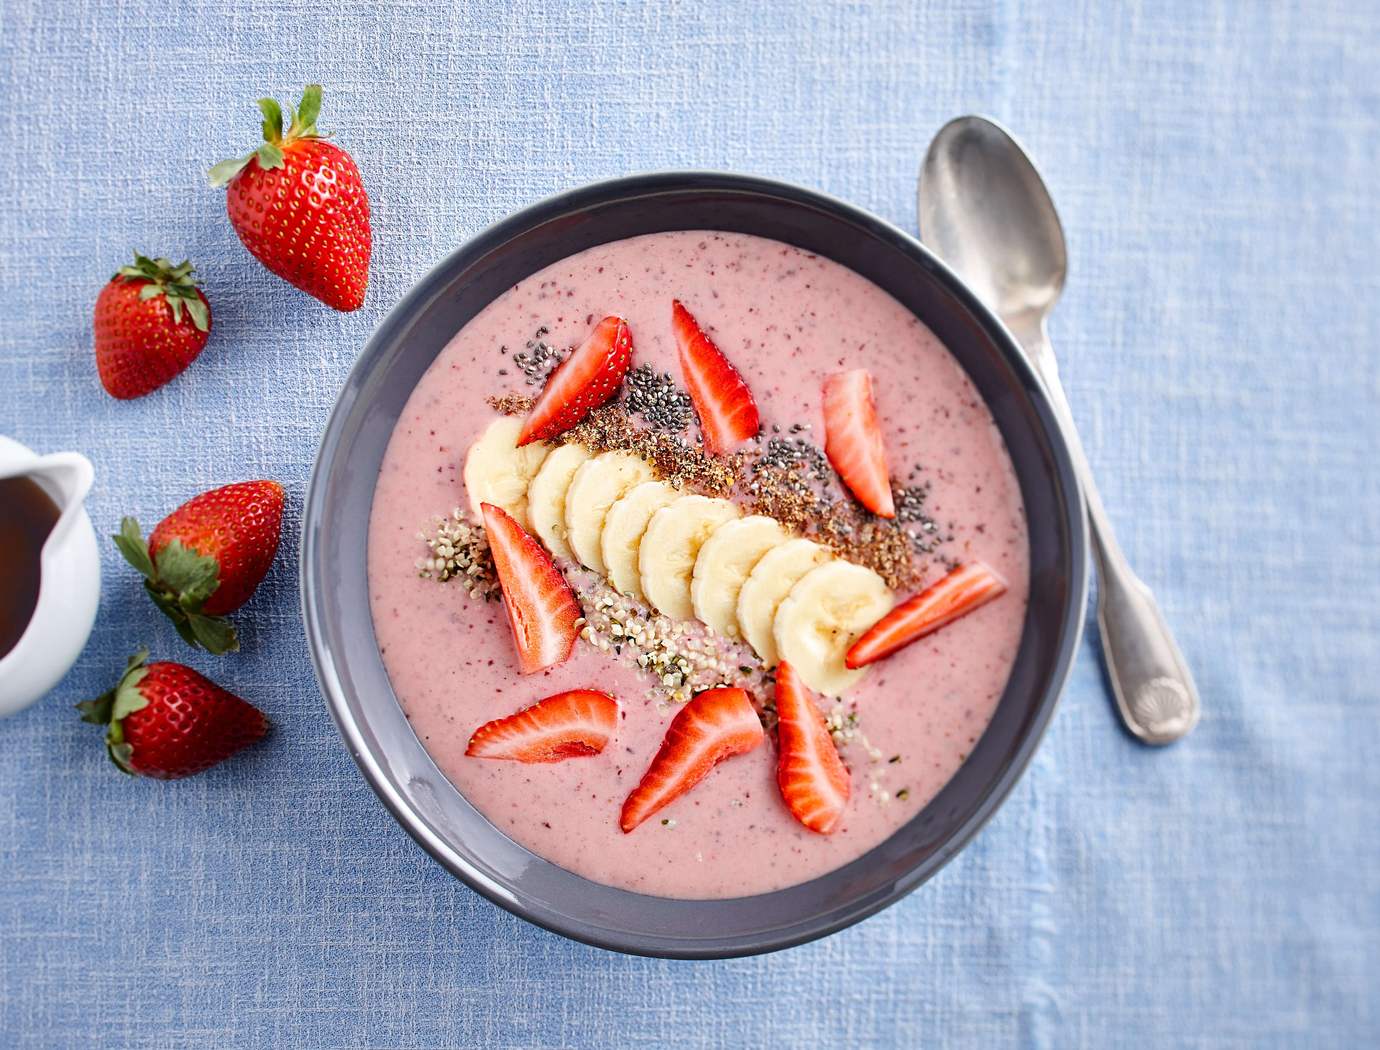 Strawberry, banana and red kidney bean smoothie bowl